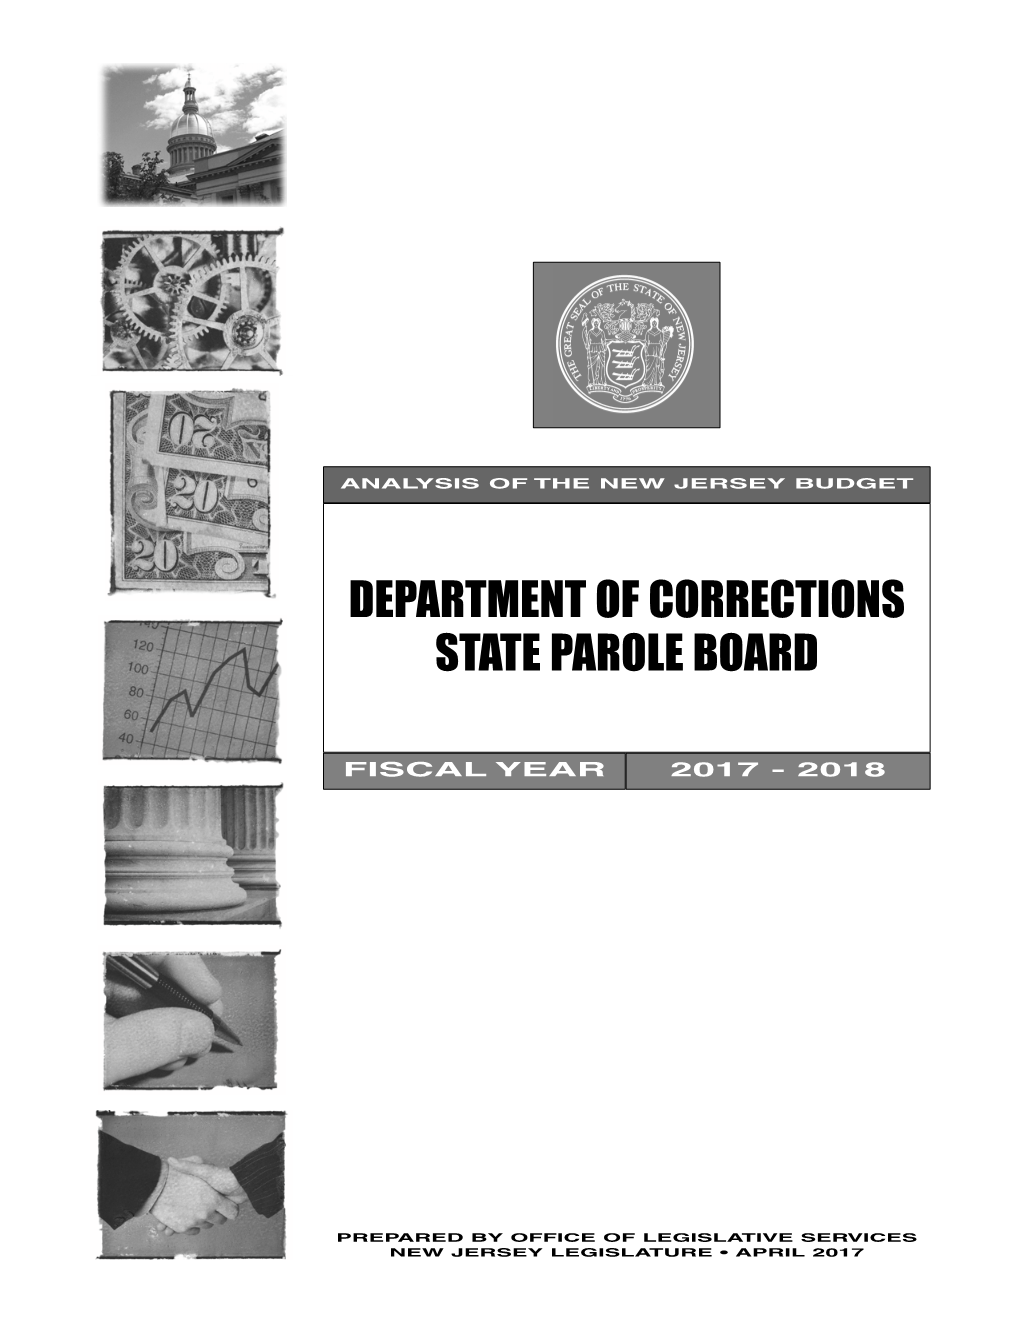 Department of Corrections State Parole Board